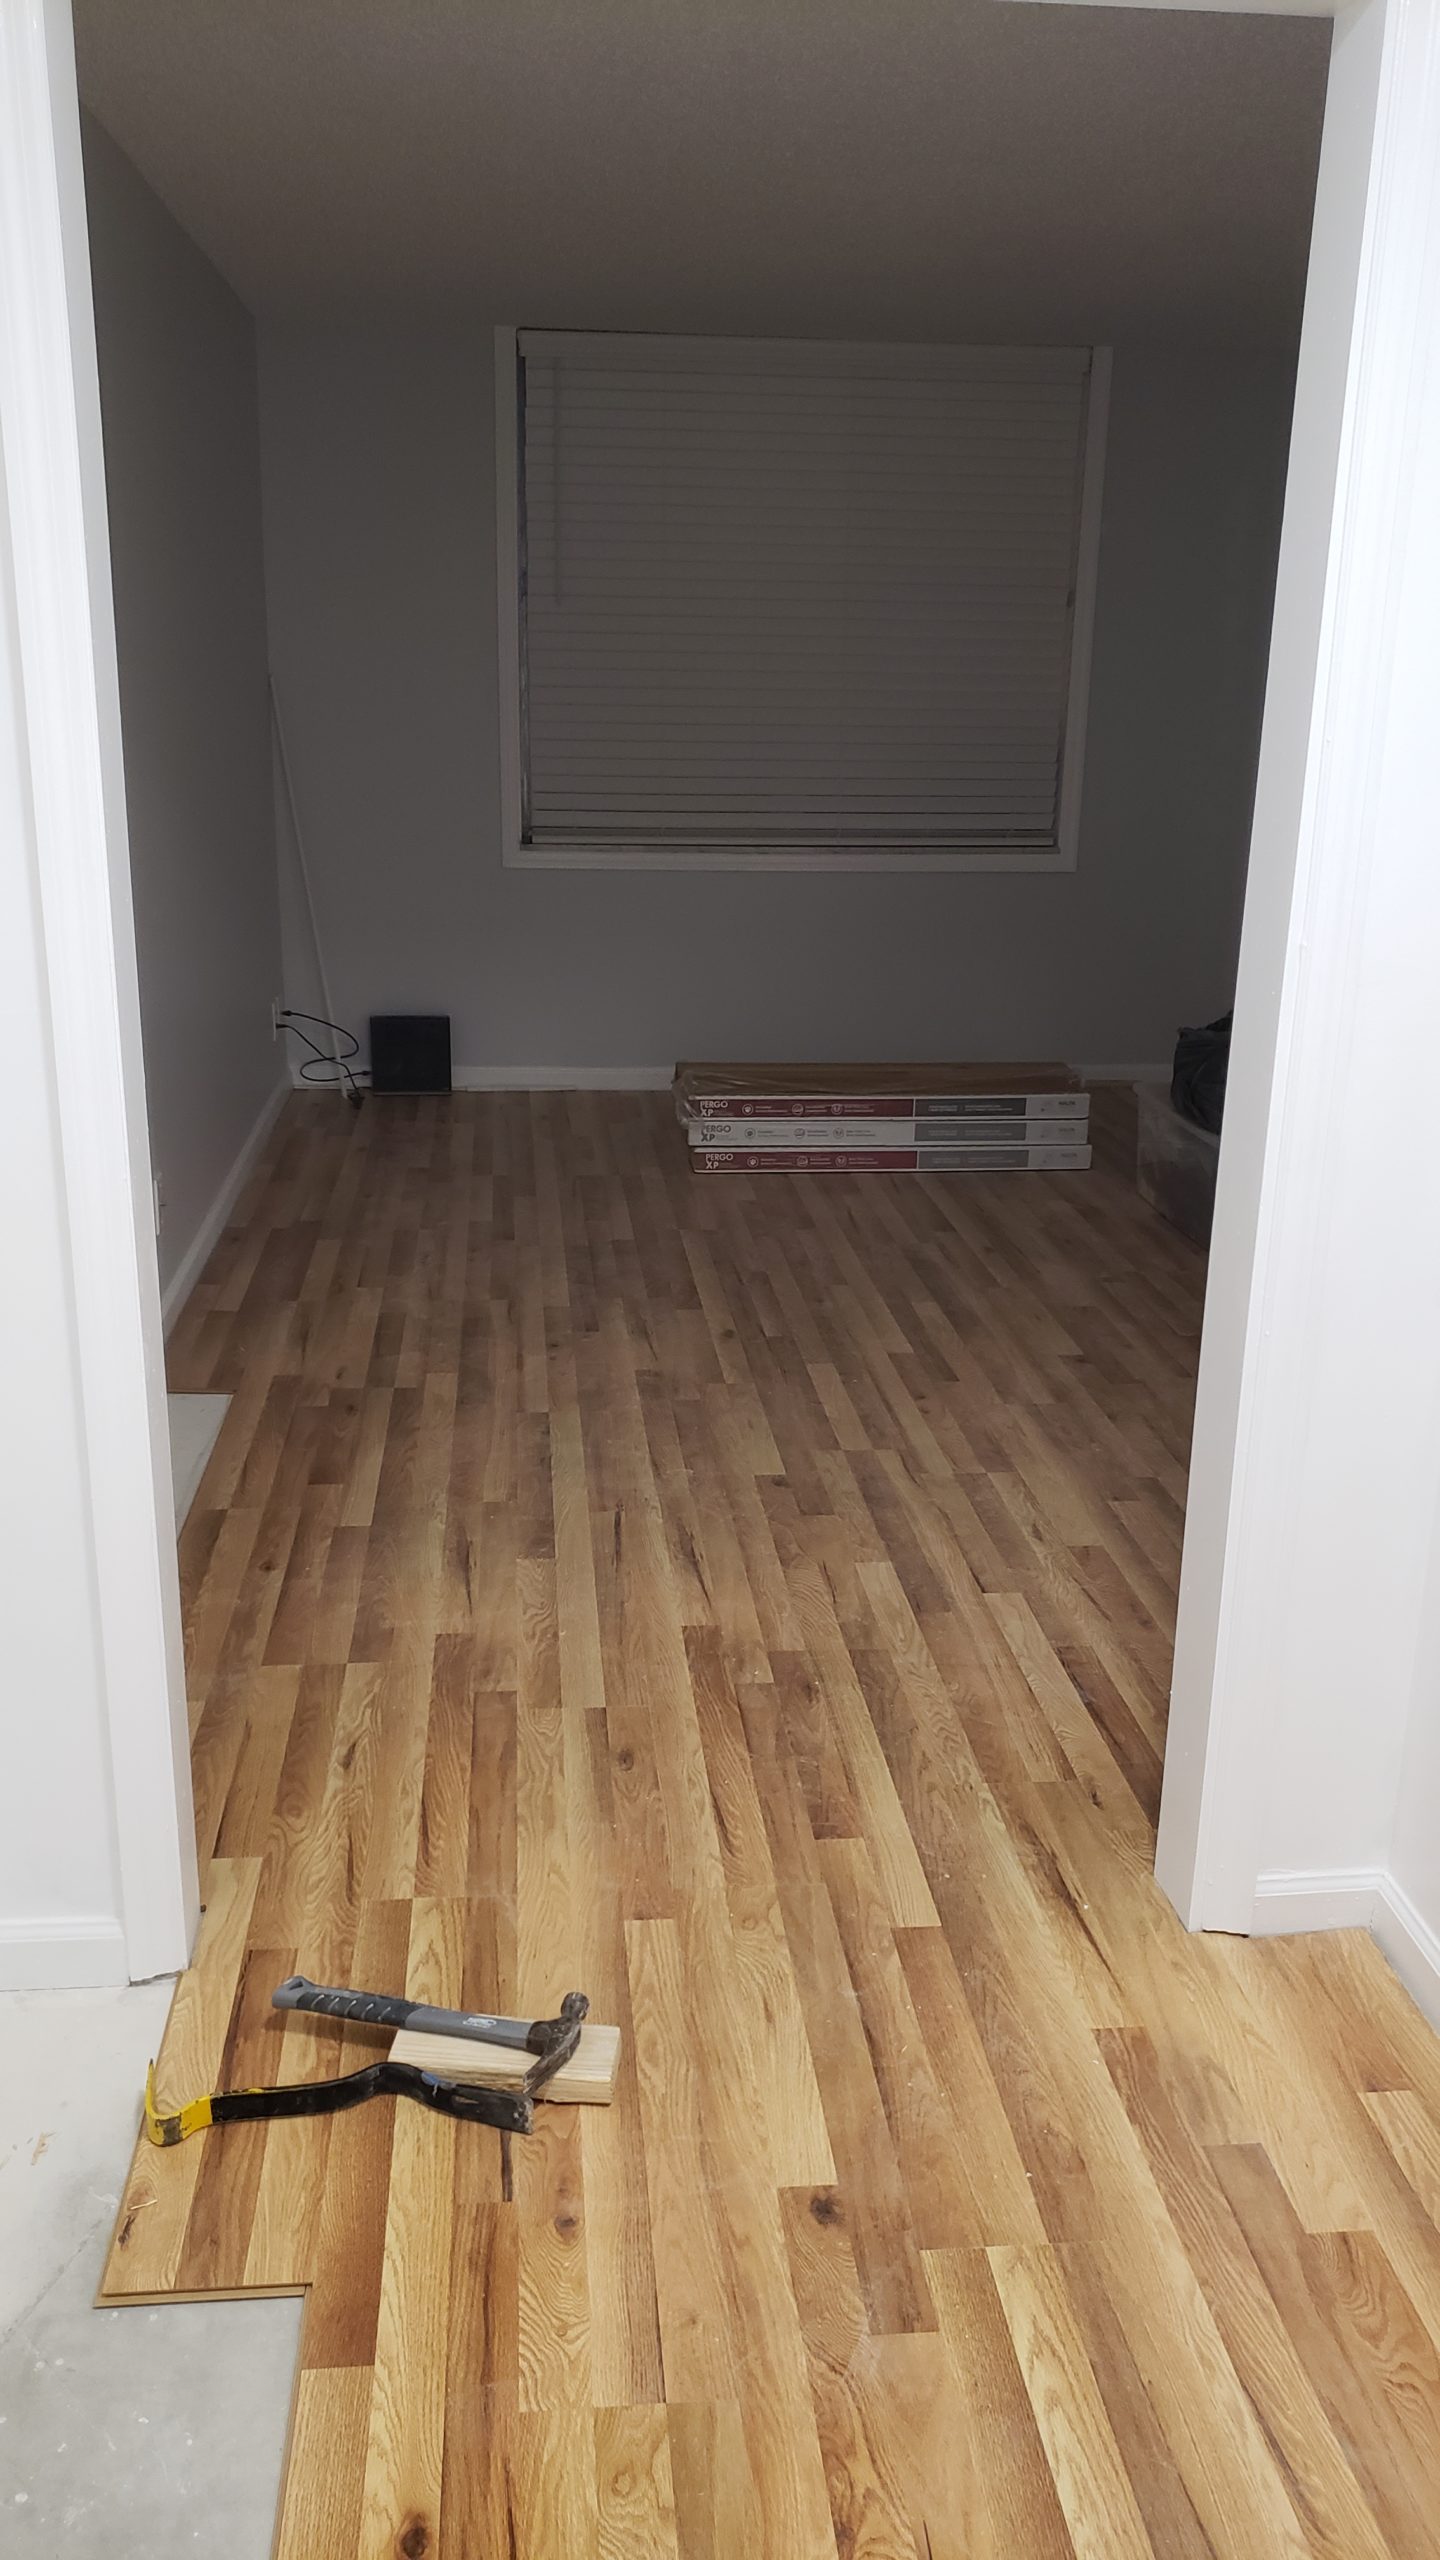 Nearly Completed Wood Floor Laminate Job - The Remodeling Doctor